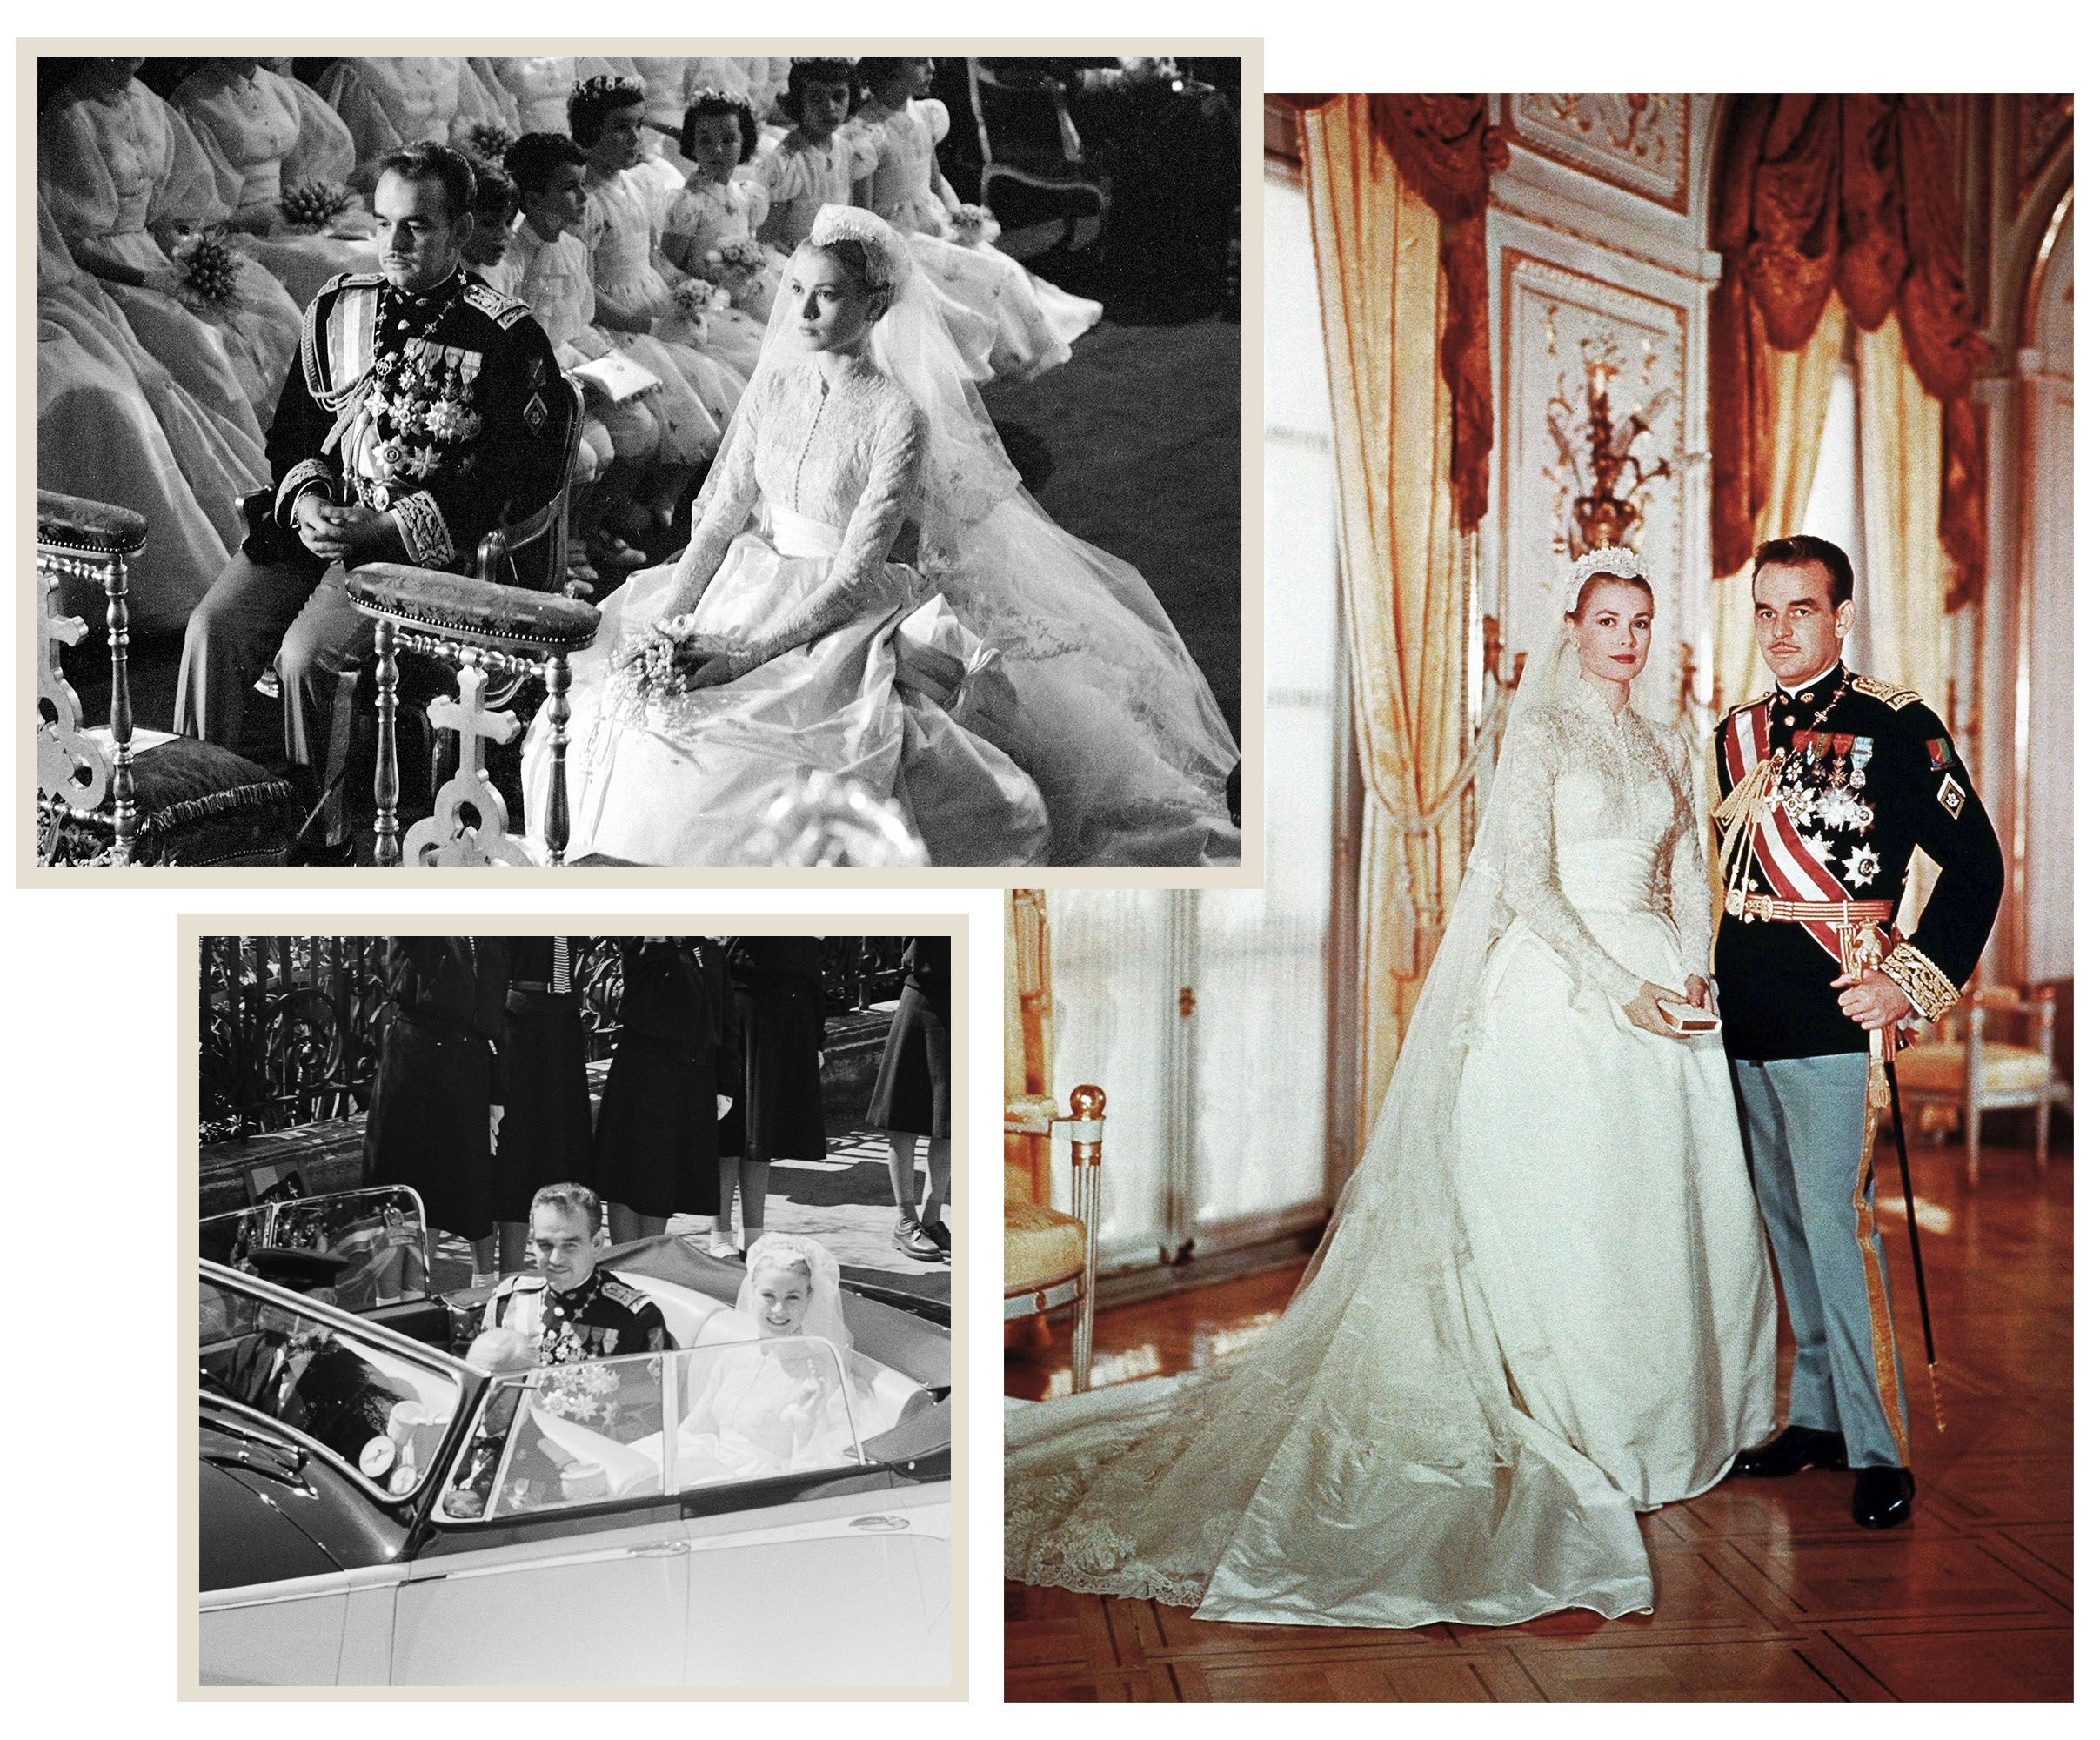 What have been the most 'iconic and stunning' royal wedding gowns  throughout history? - Quora